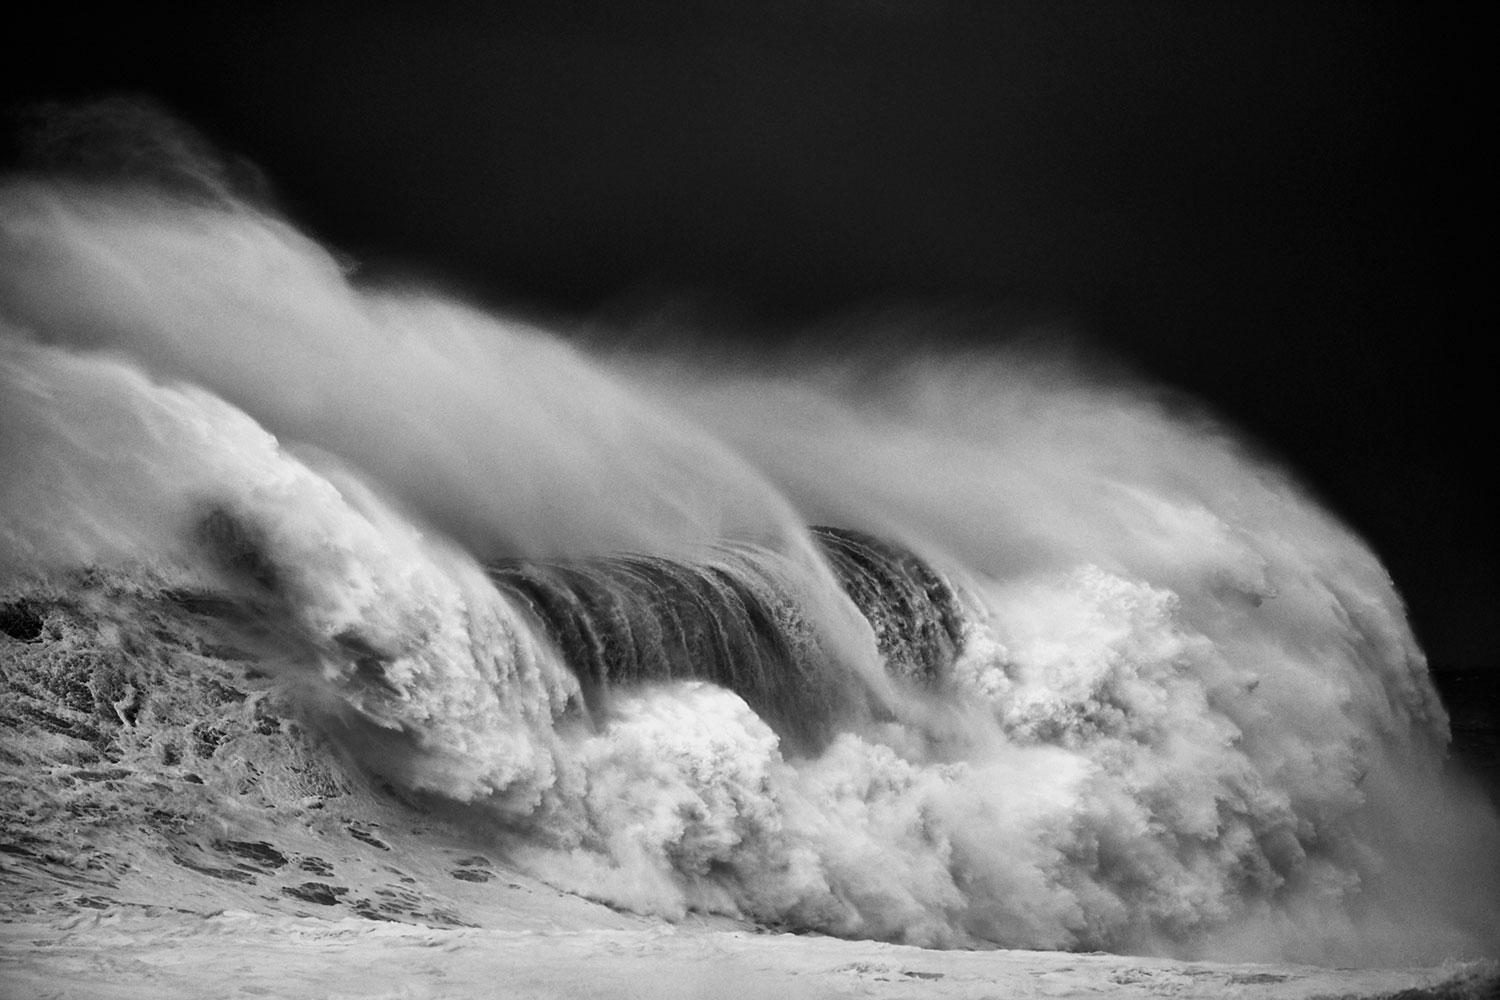 Abstract Photograph Alessandro Puccinelli - Nazare, Portugal, Vagues, Photographie de paysages marins (GRAND FORMAT)